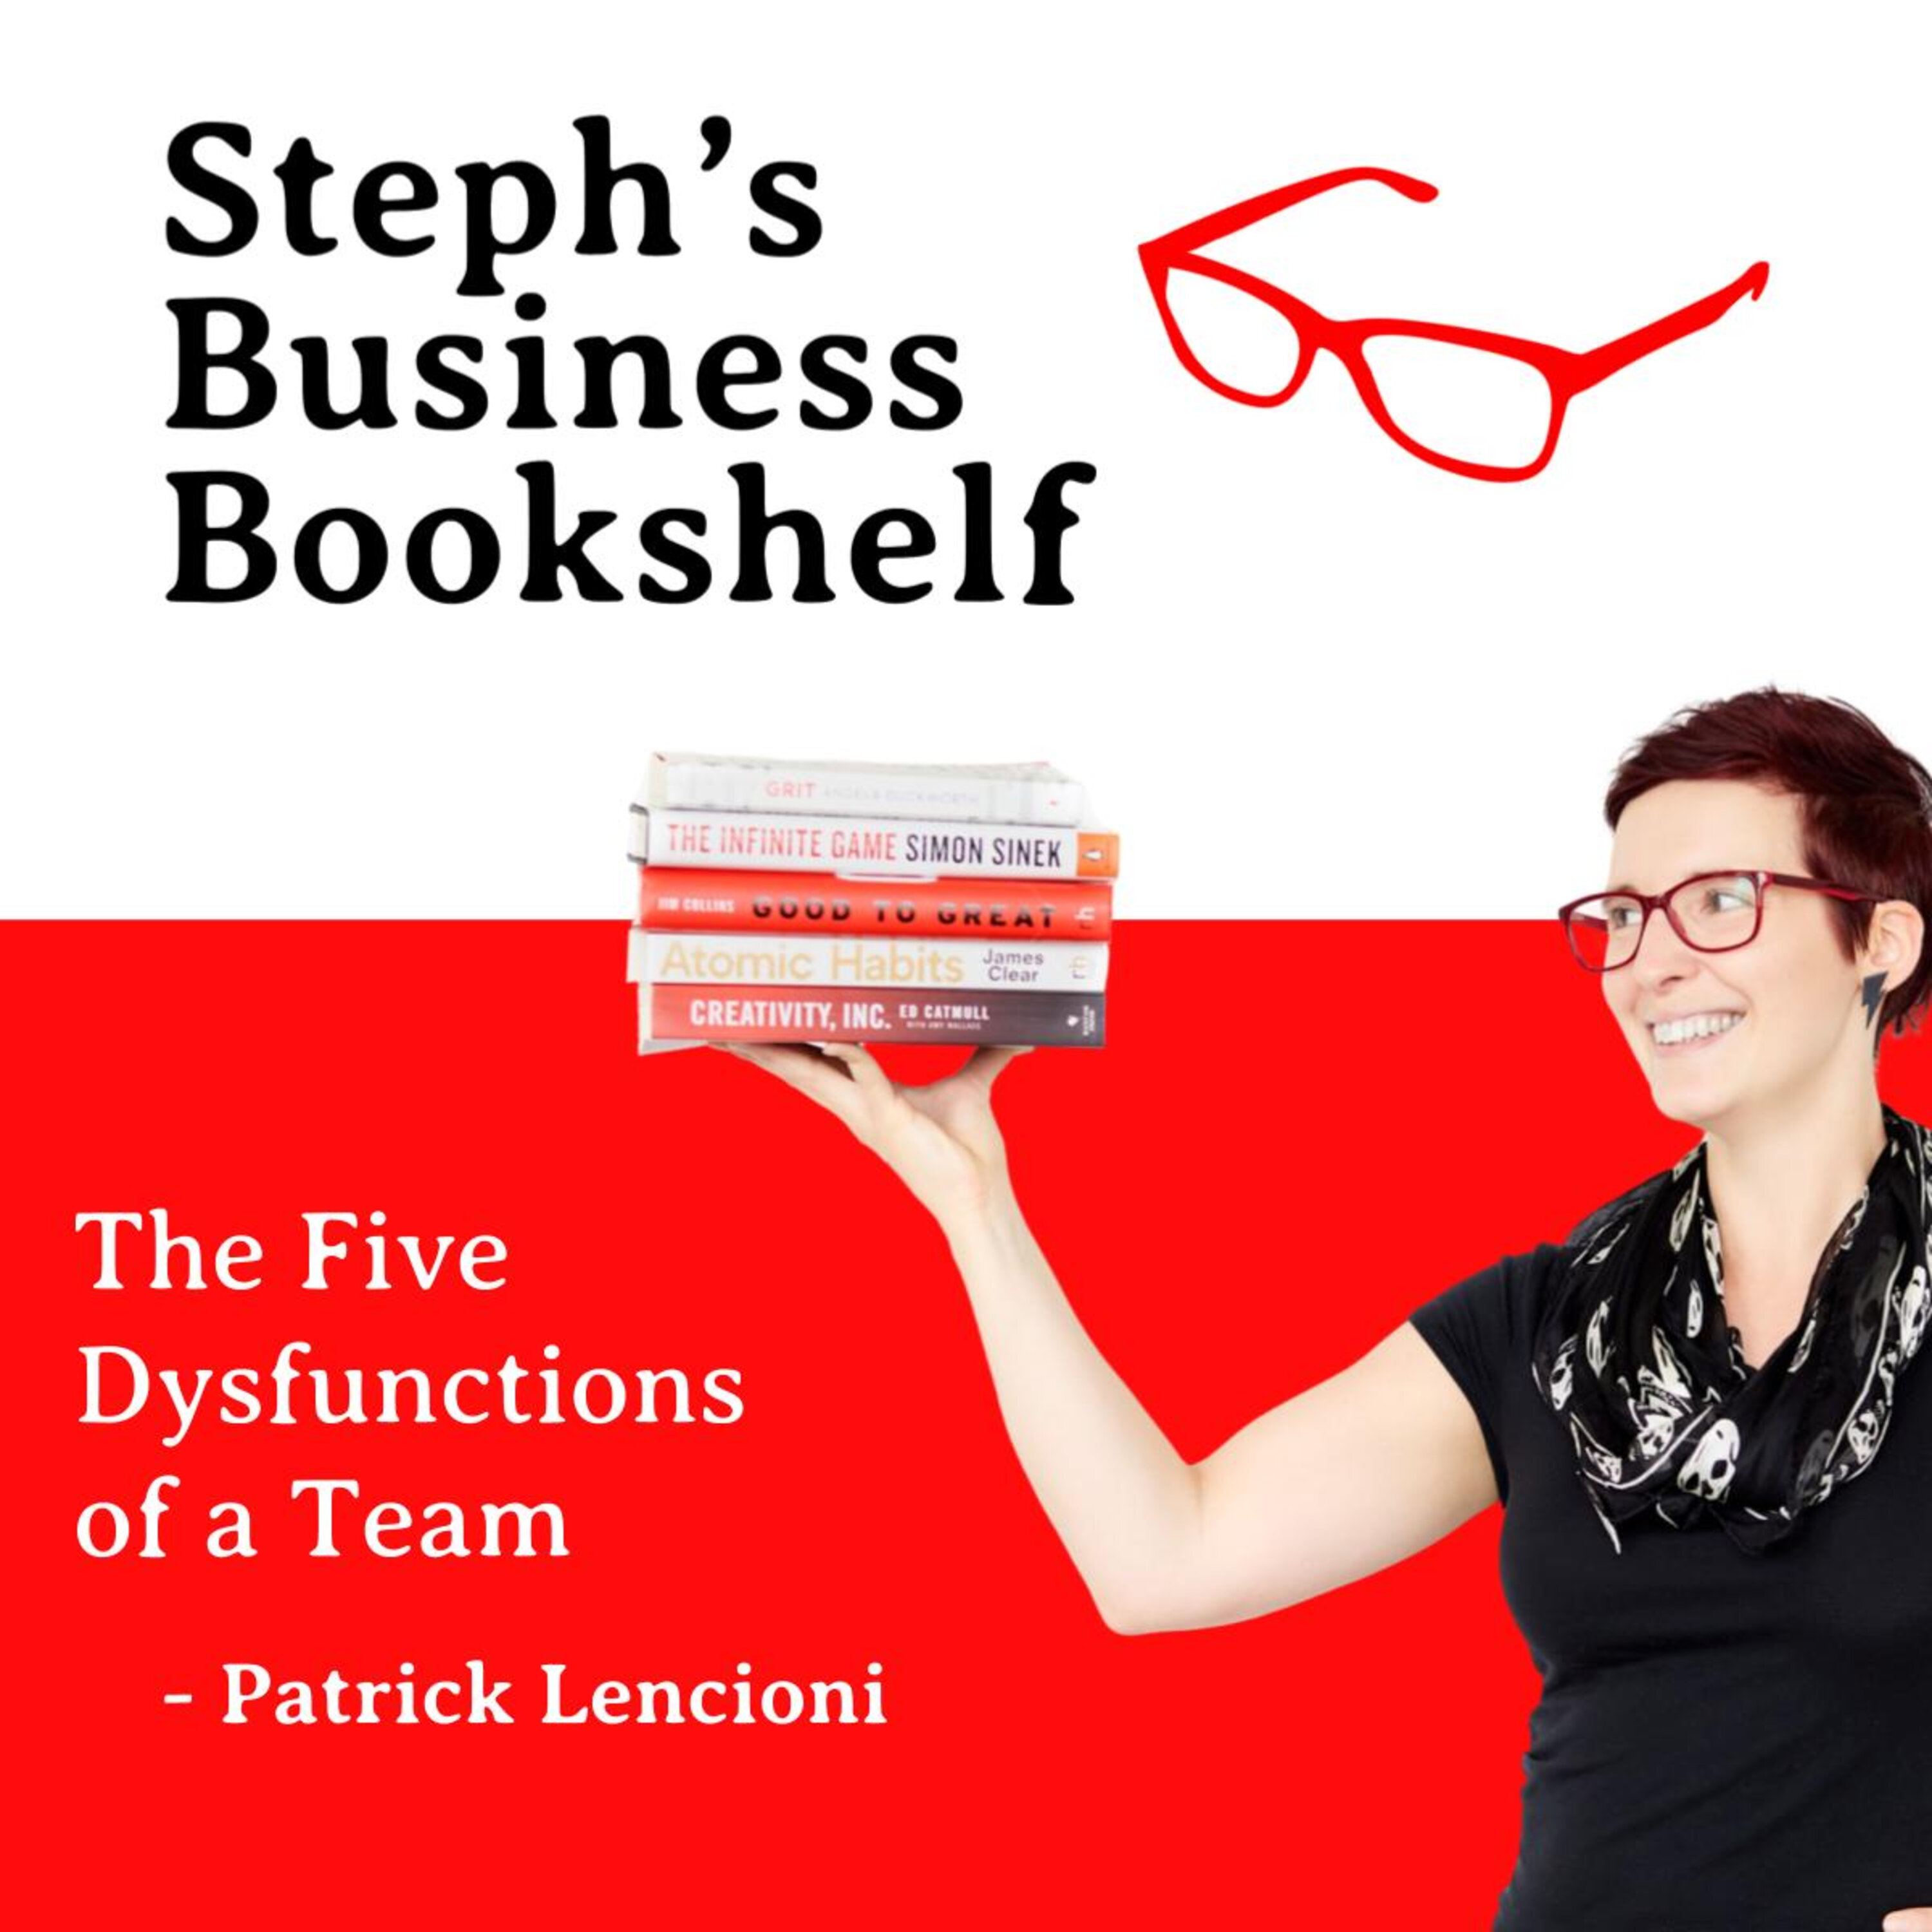 The Five Dysfunctions of a Team by Patrick Lencioni: Why you need to embrace conflict